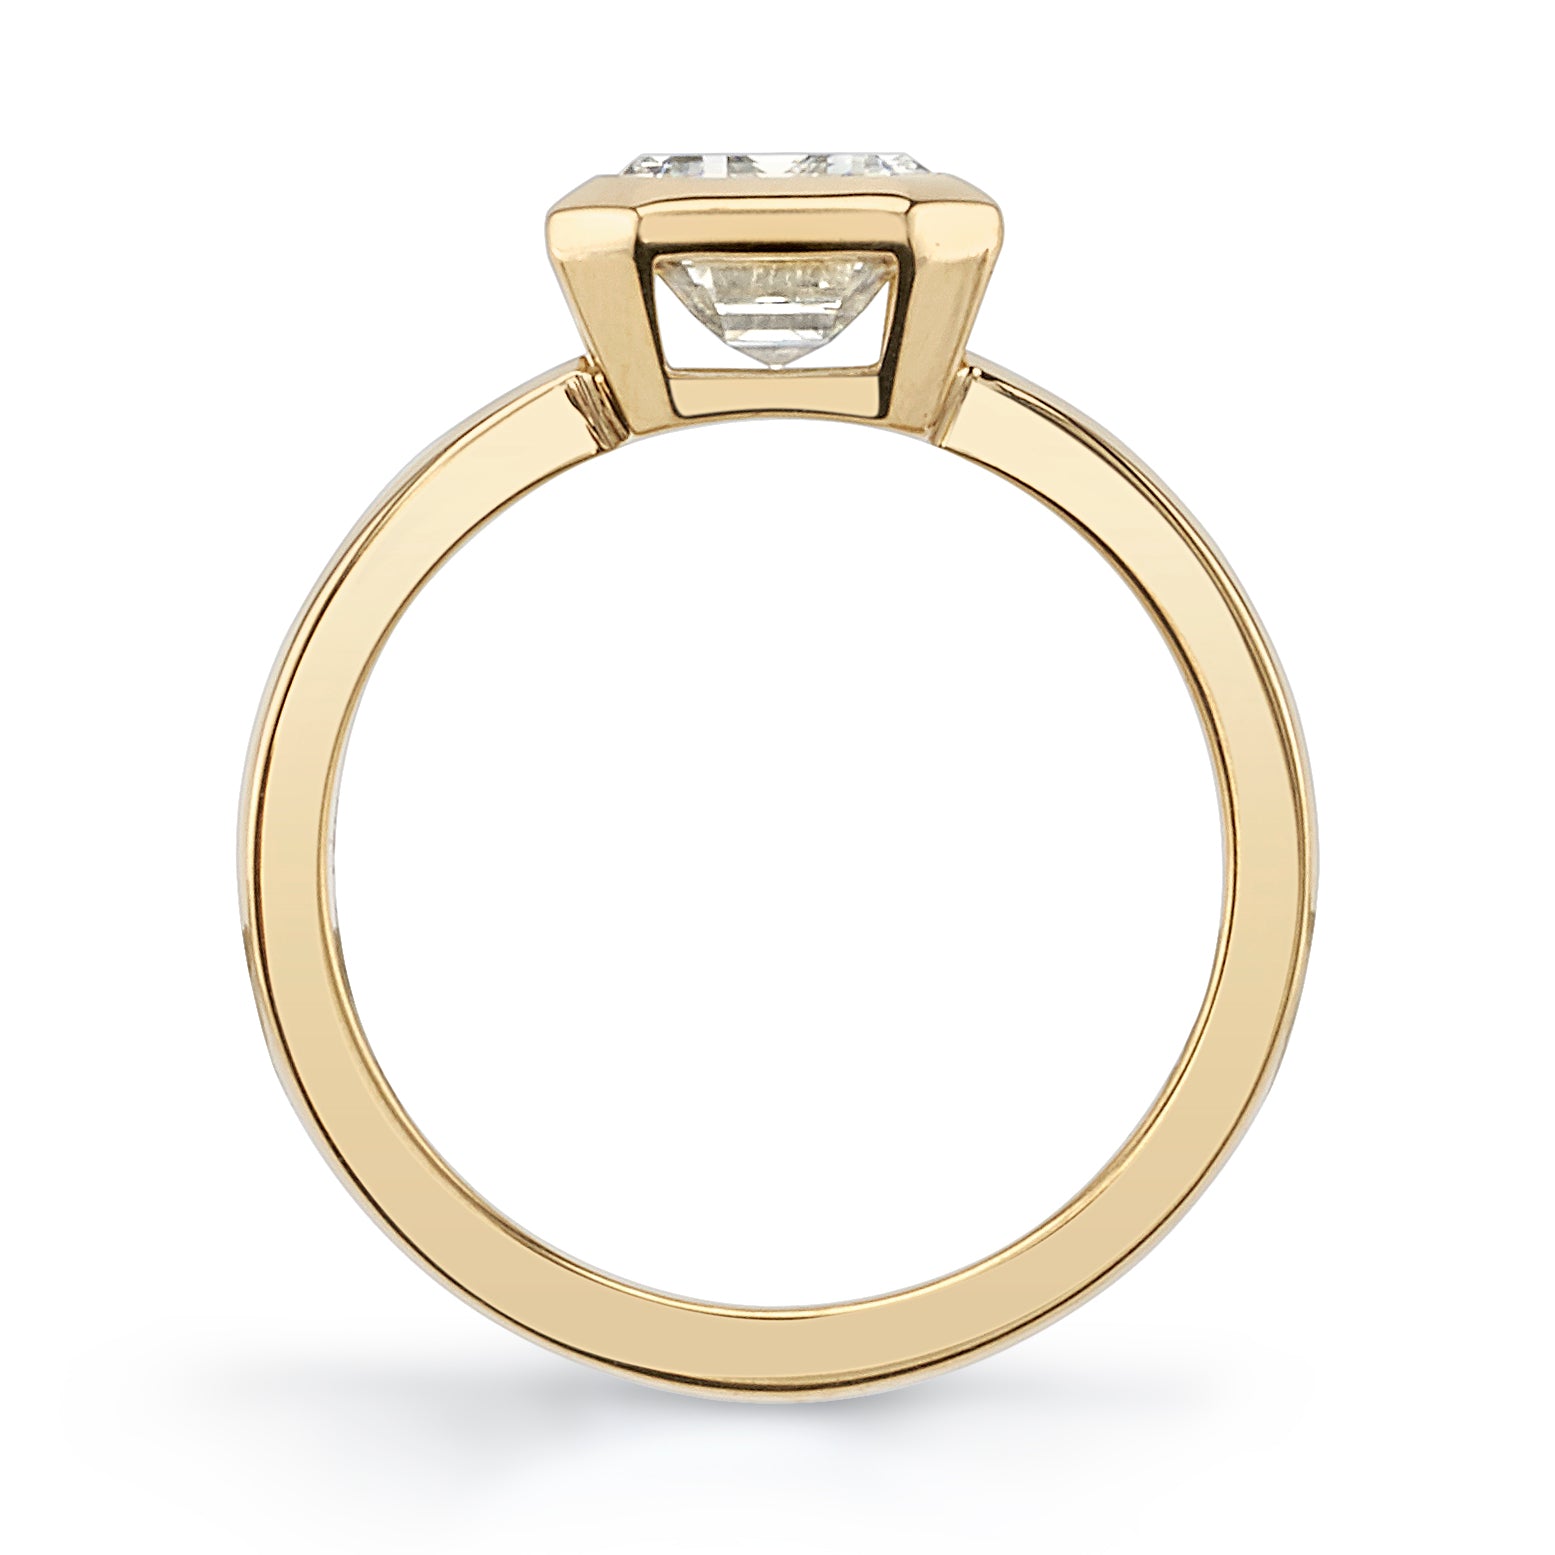 SINGLE STONE RAE RING featuring 2.03ct N/VS1 GIA certified emerald cut diamond bezel set in a handcrafted 18K yellow gold mounting.